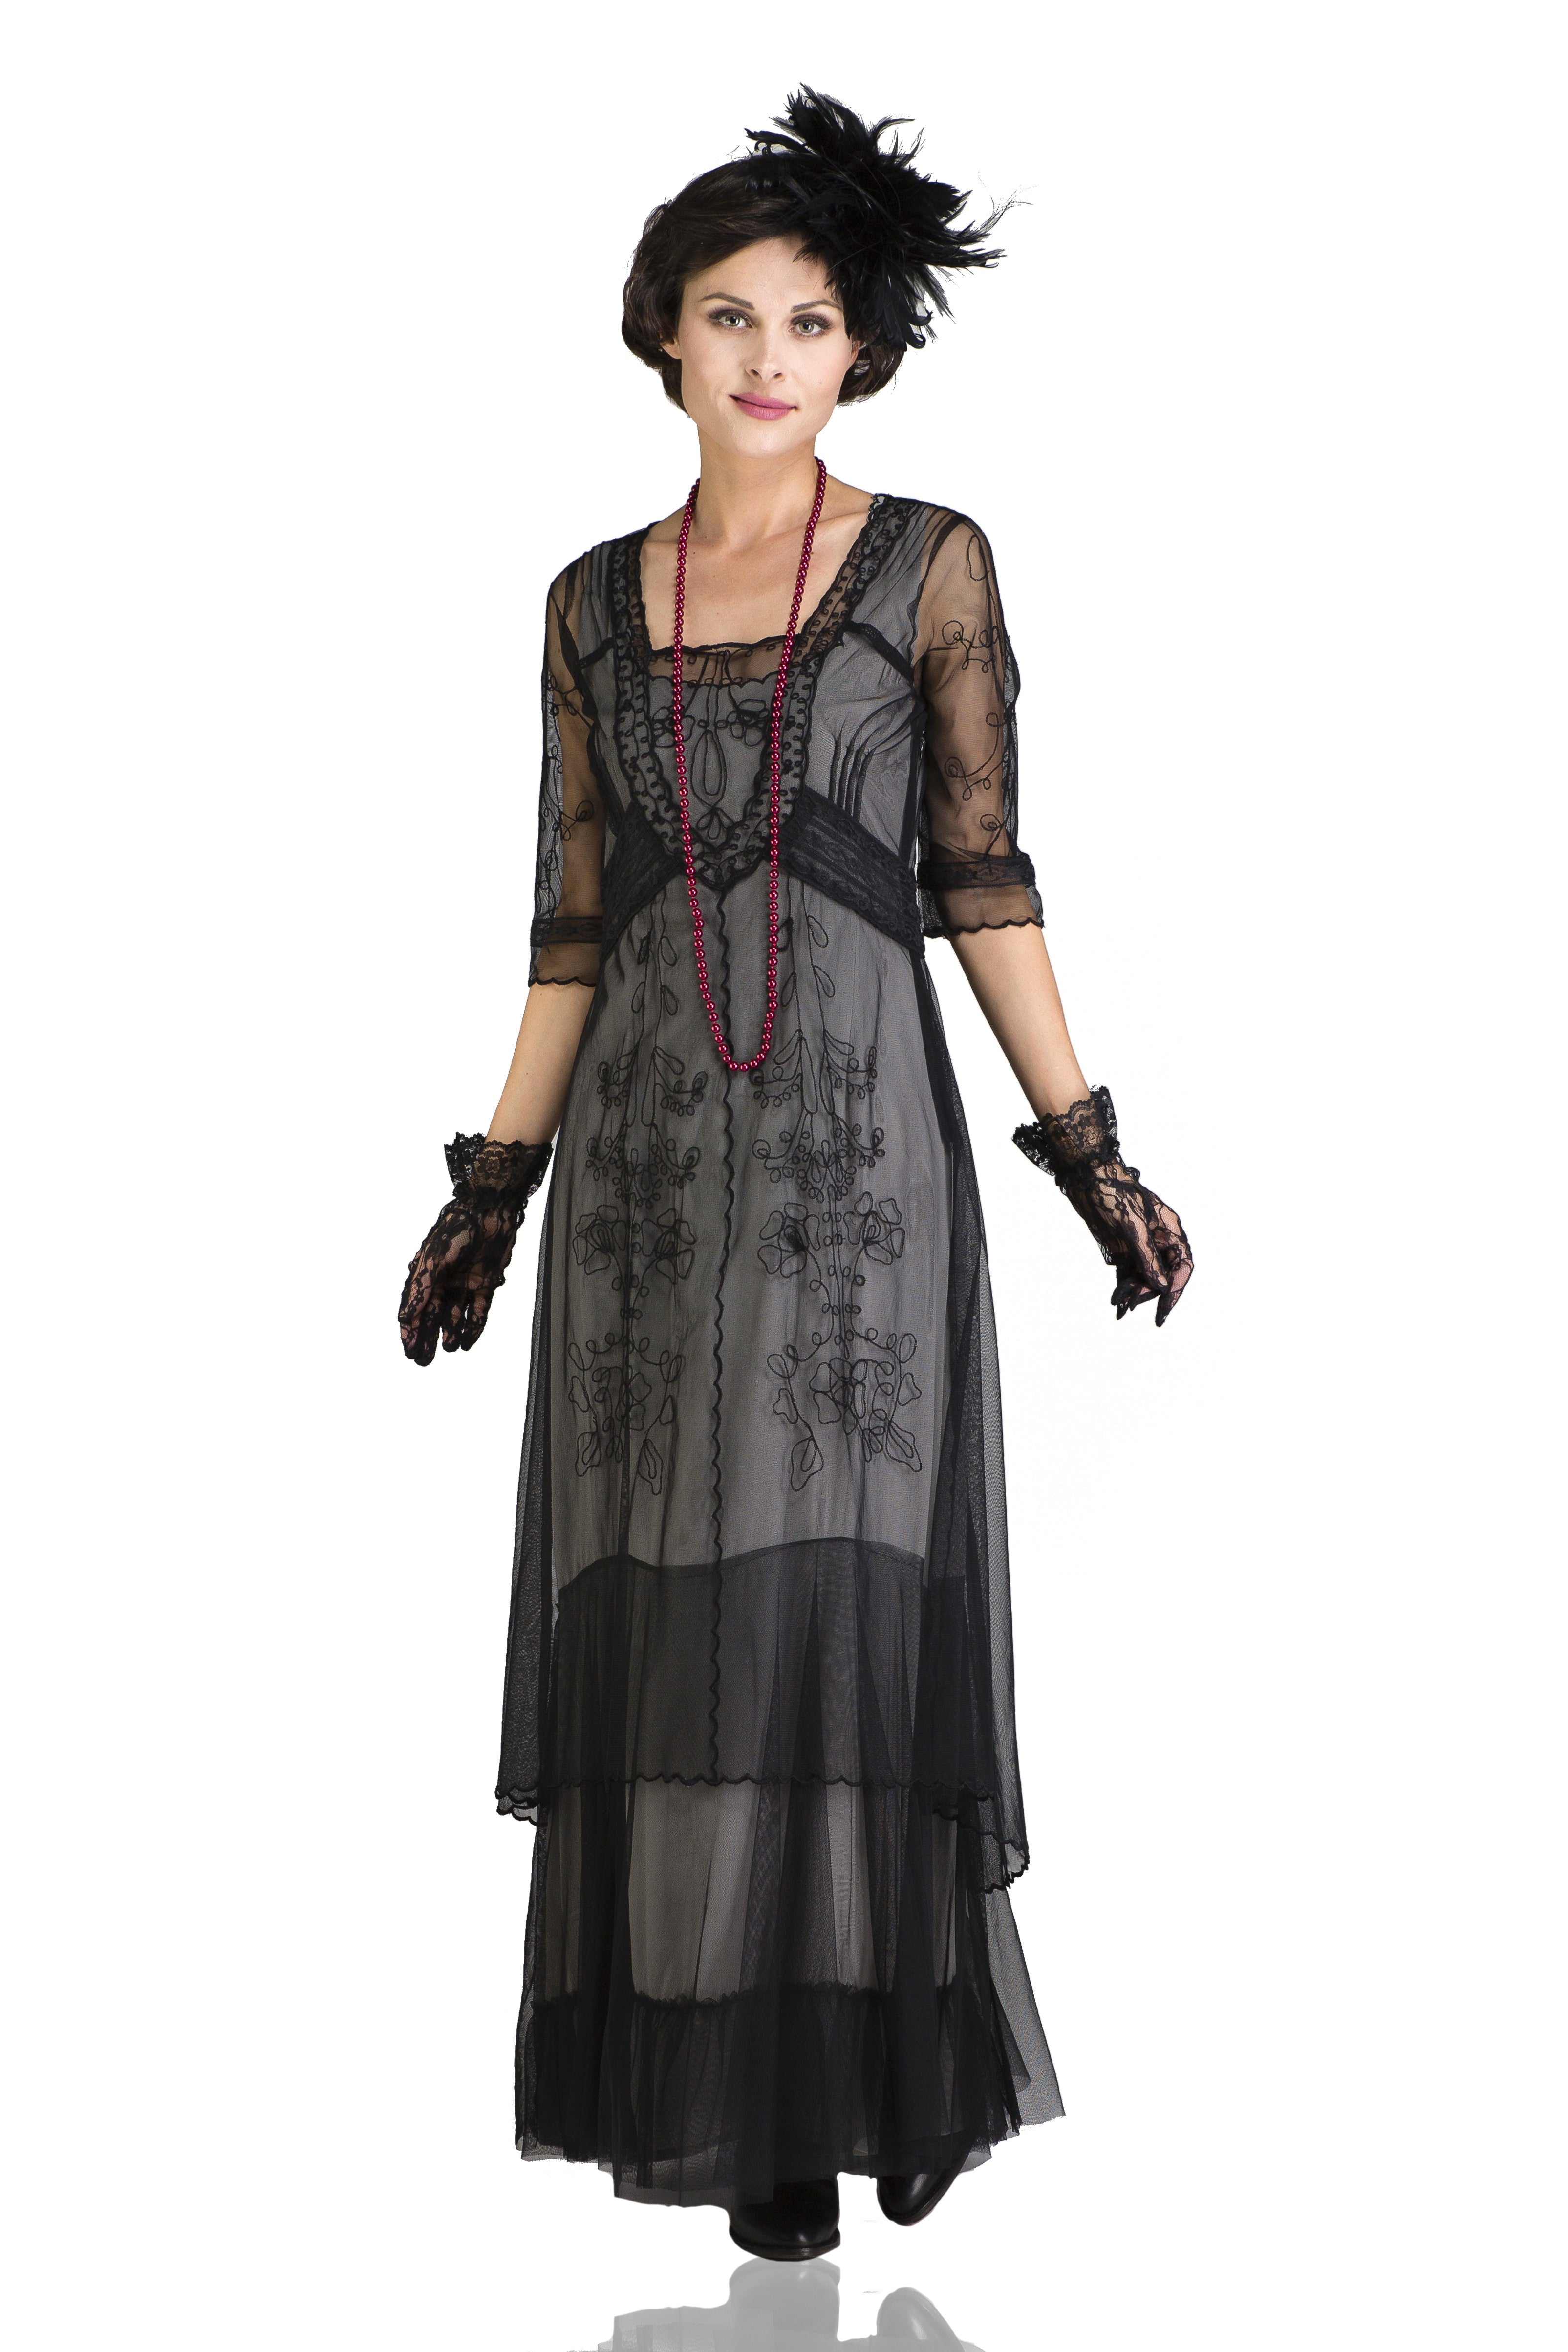 Steampunk Costumes, Outfits for Women Victoria Vintage Style Party Gown in Black by Nataya $265.00 AT vintagedancer.com